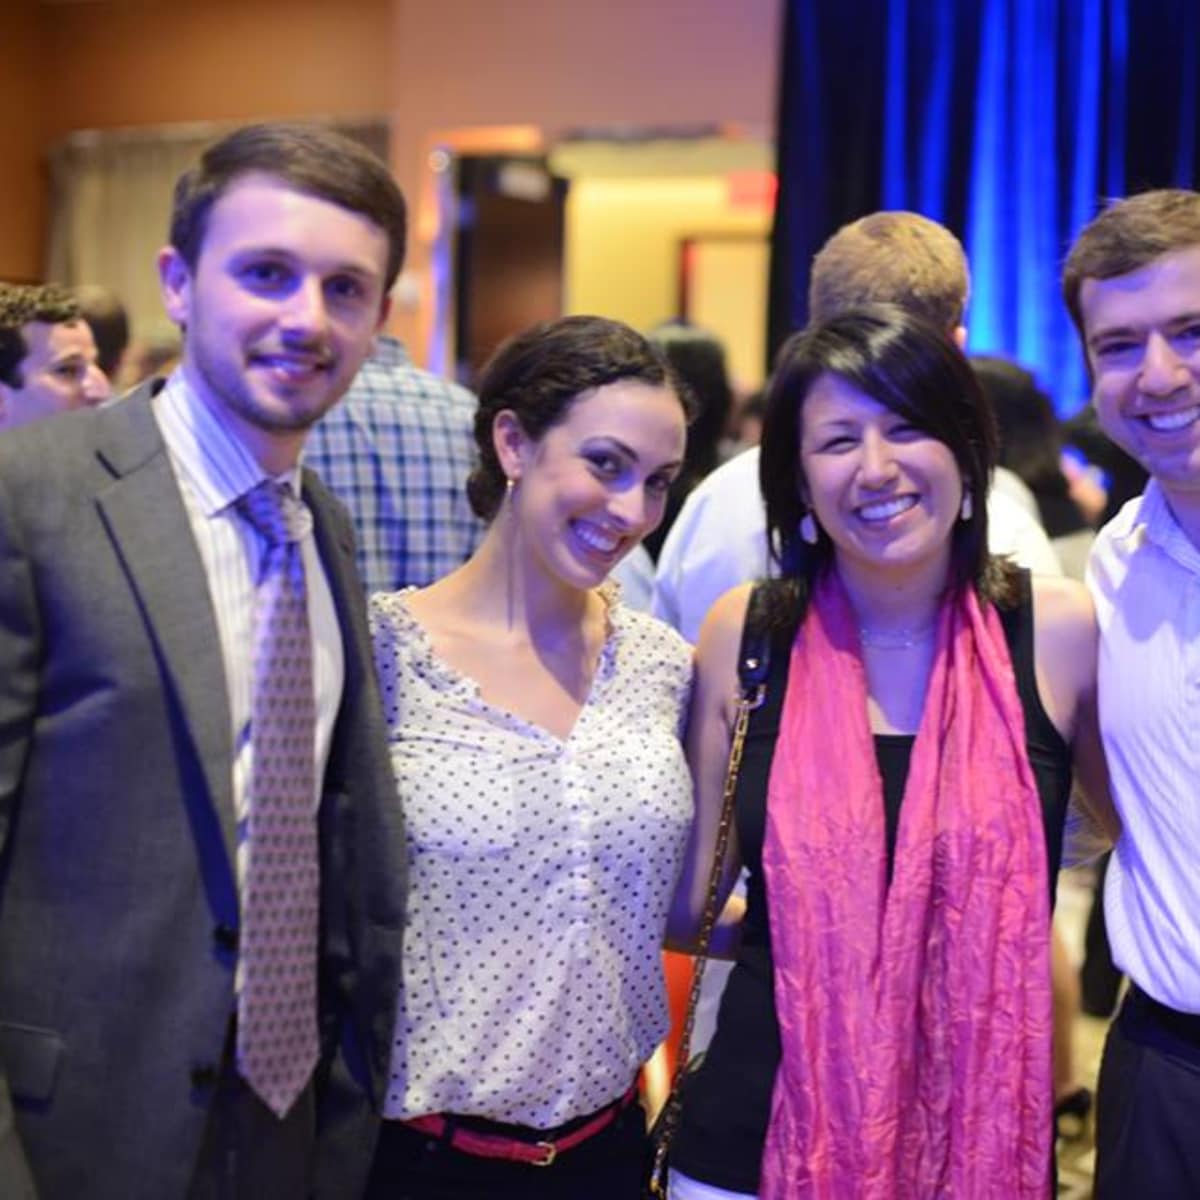 Houston's Top Young Professionals: 10 YP groups that do good and party